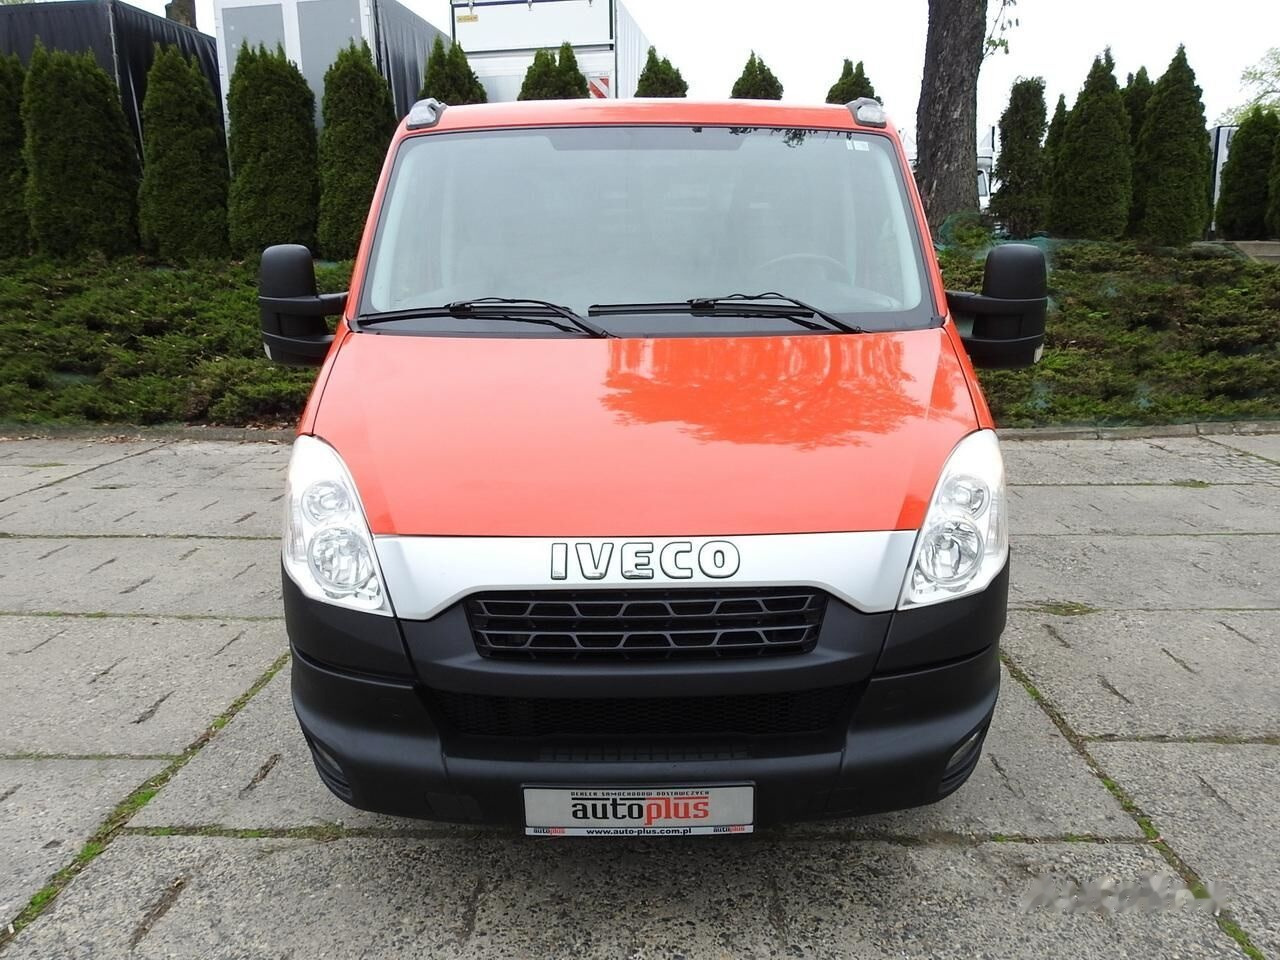 Véhicule utilitaire benne IVECO DAILY 35C13 Tipper: photos 2